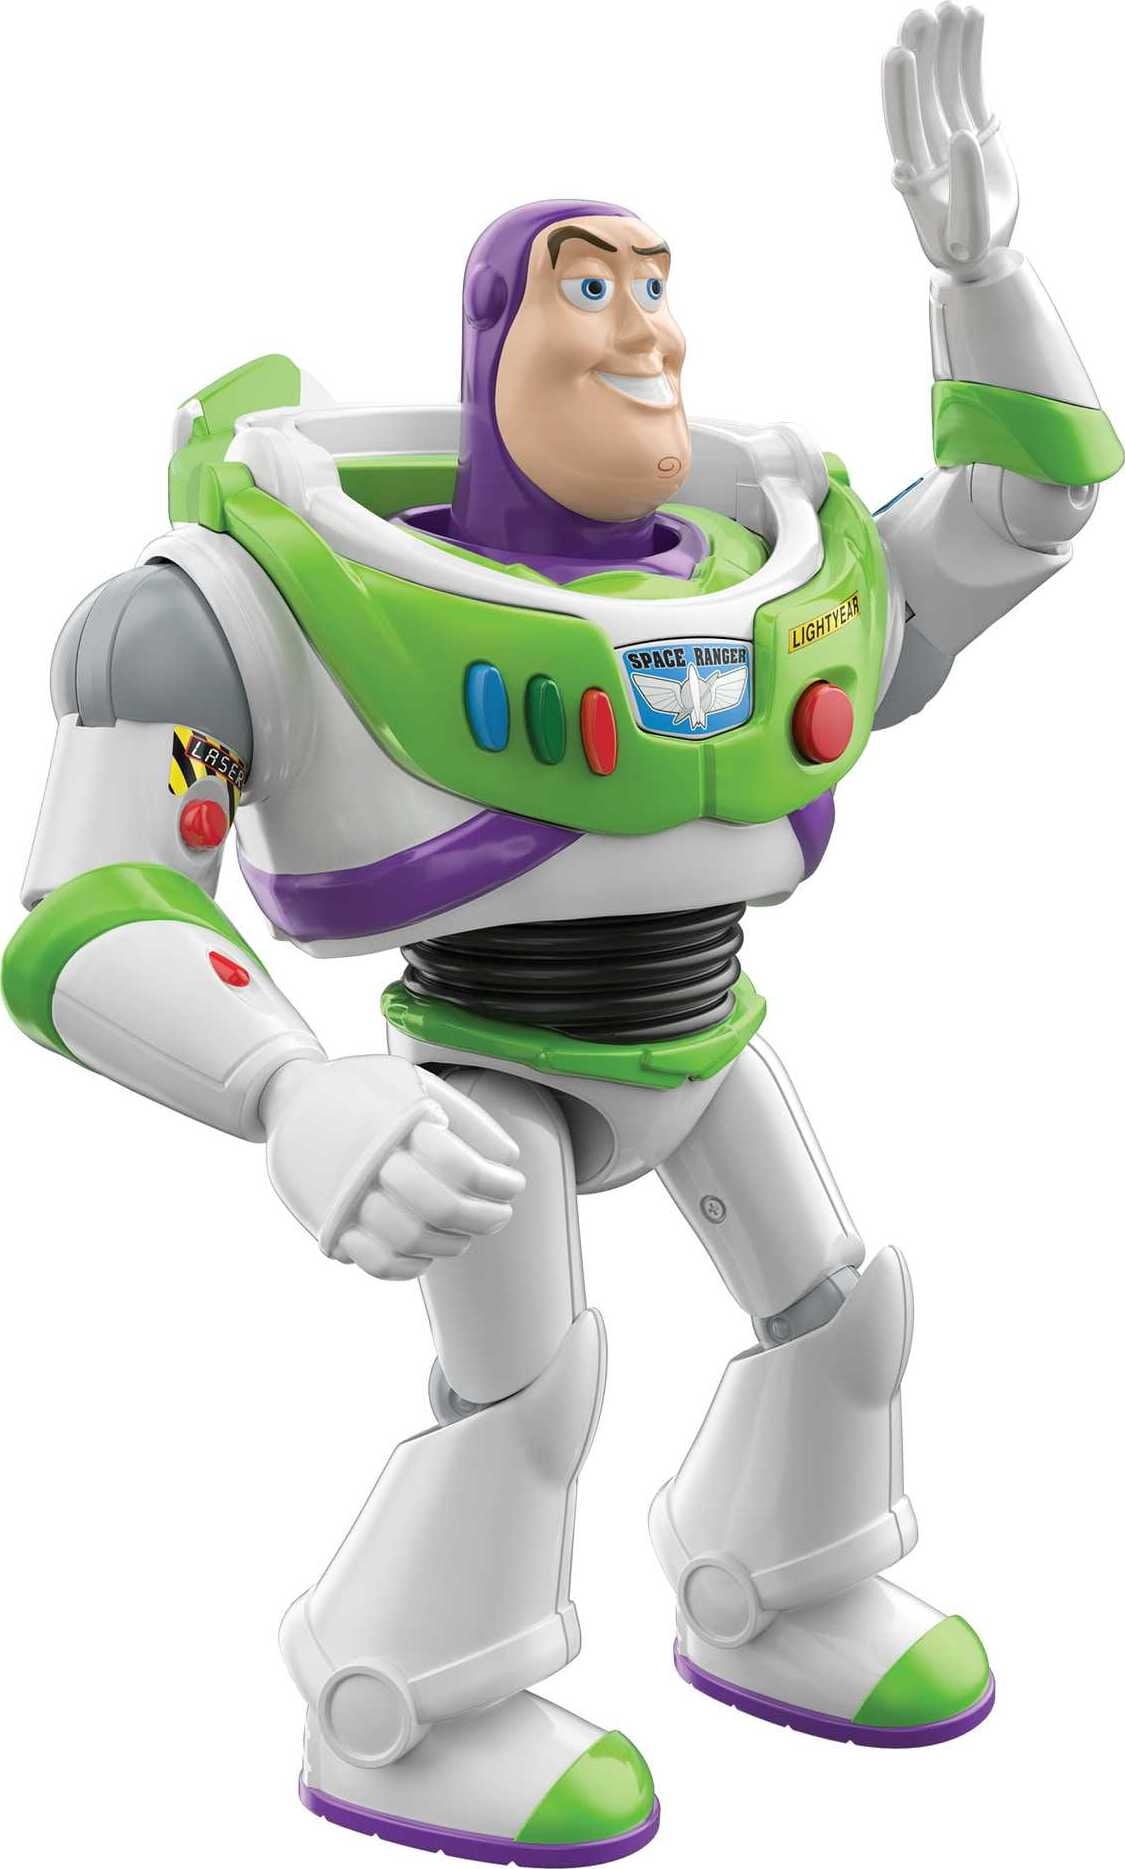 Movie Toy Highly Posable with Authentic Detail Gift for Collectors & Kids Ages 3 Years Old & Up Disney Pixar Toy Story Buzz Lightyear Action Figure 7-in Tall 